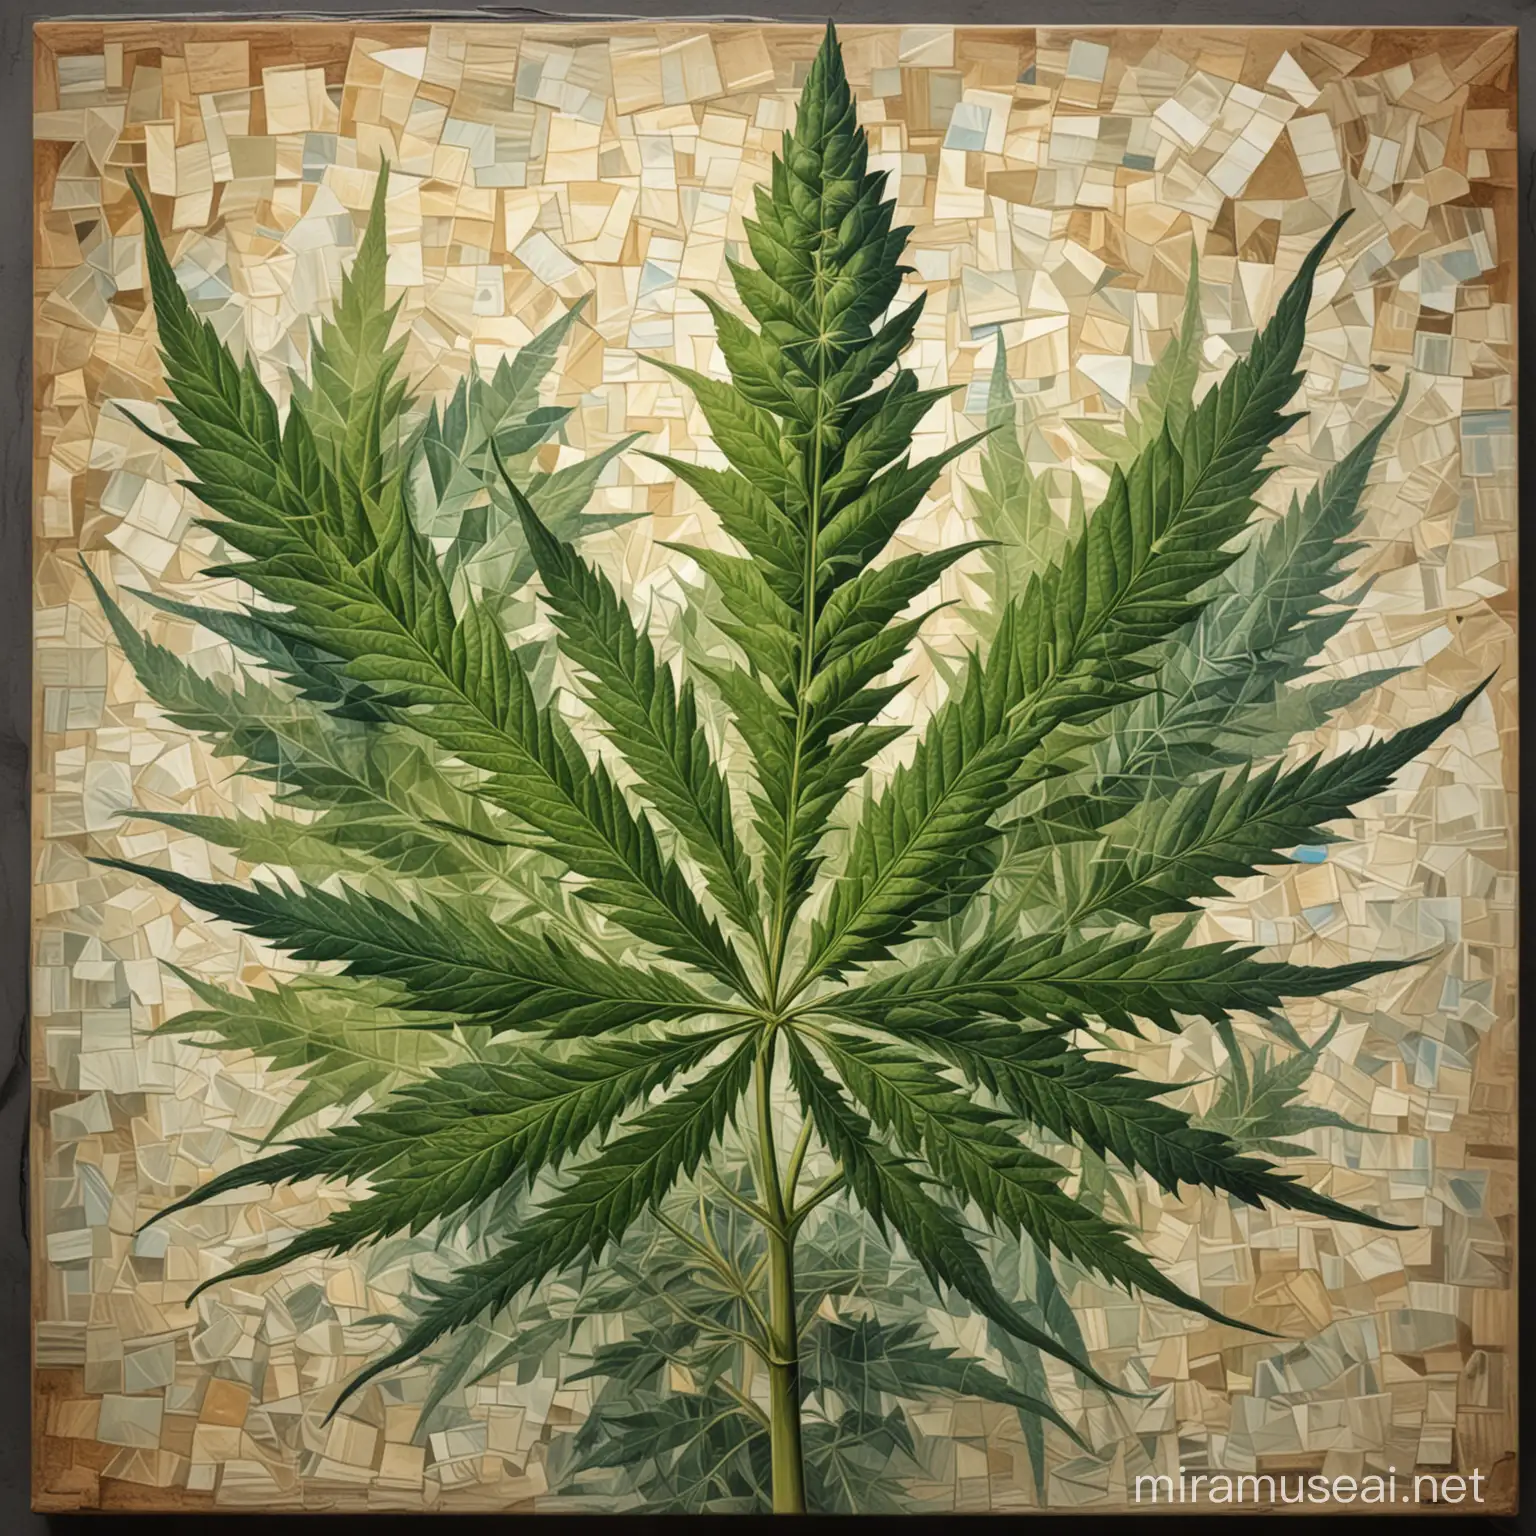 Abstract Cannabis Plant Illustration in Cubist Style